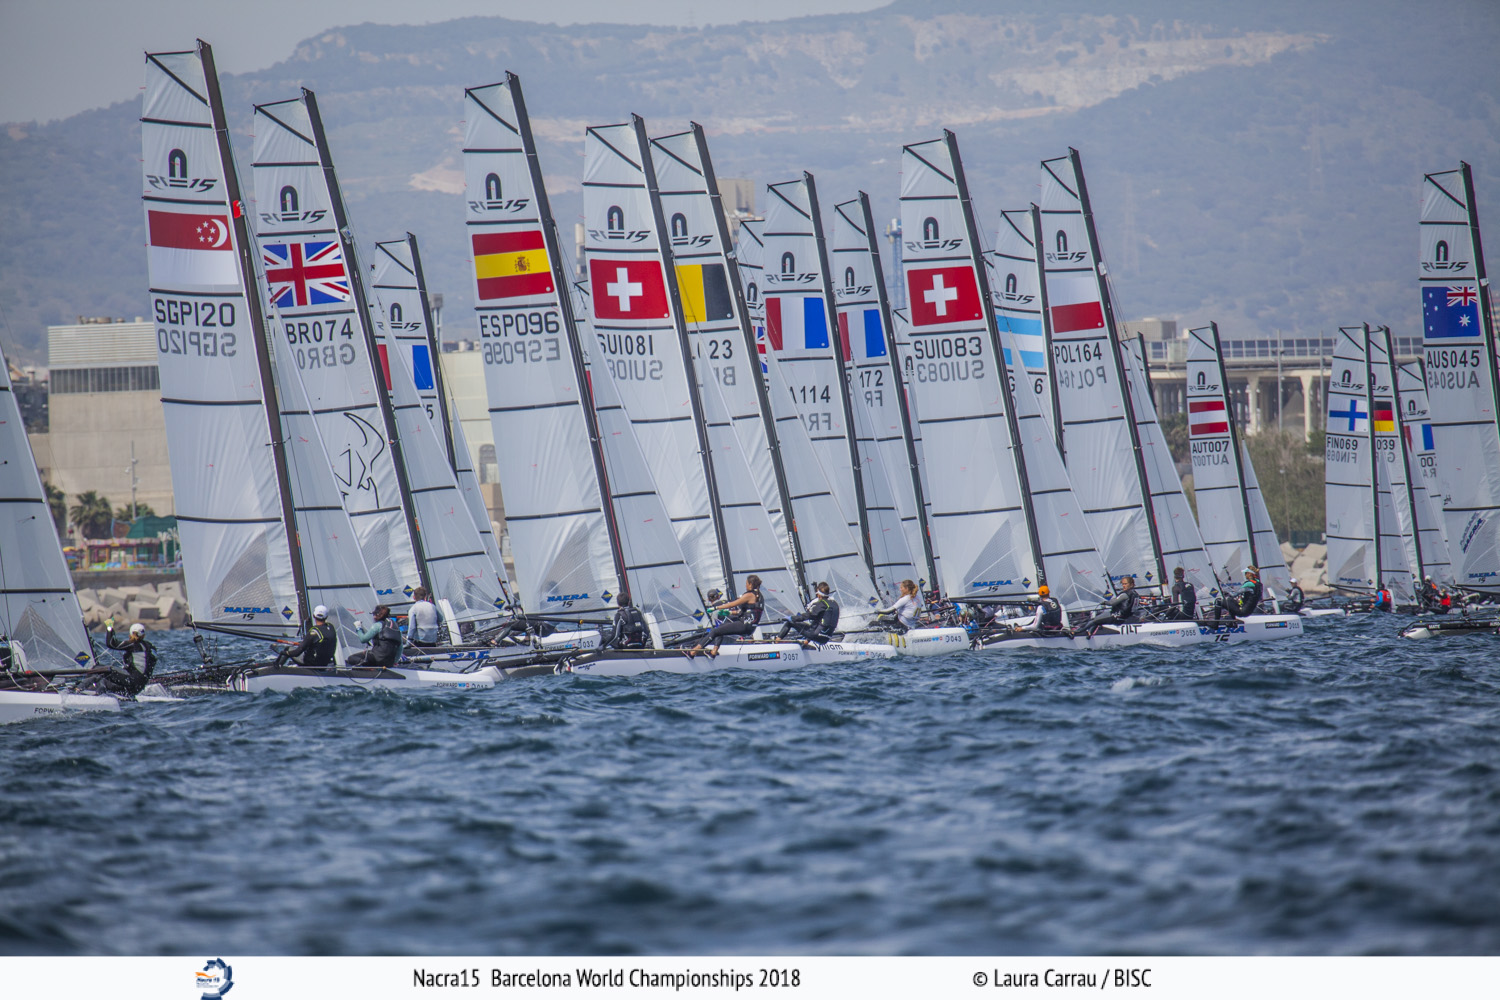  Nacra 15  World Championship  Barcelona  Day 4, NorAms 27th, 37th and 38th